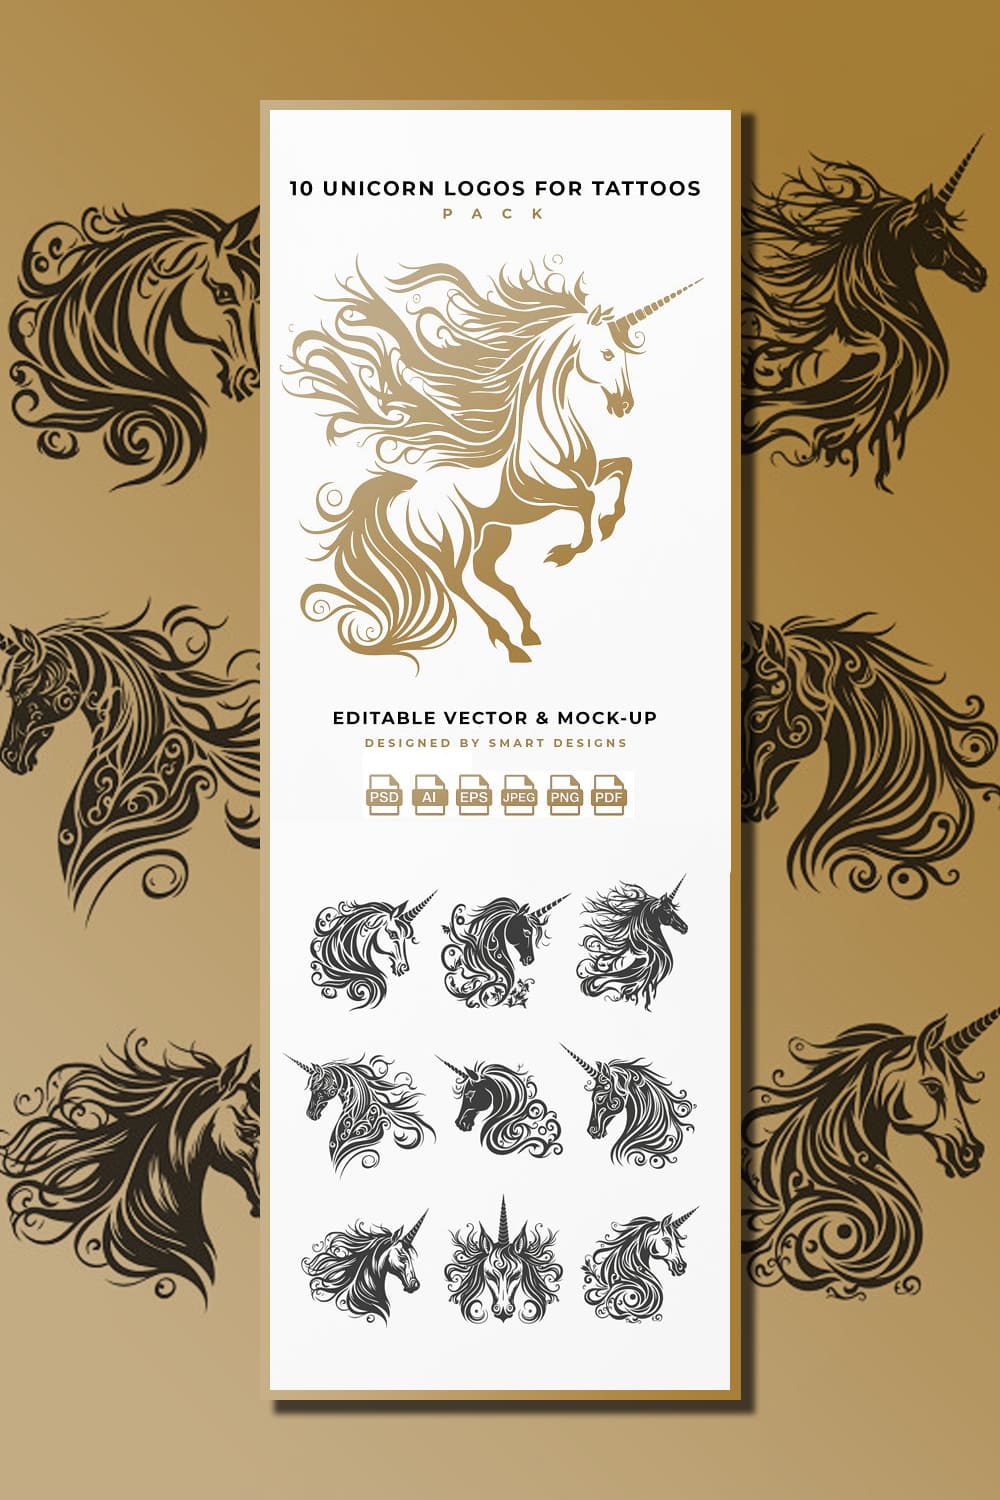 Unicorn Logos for Tattoos Pack x10 pinterest image preview.